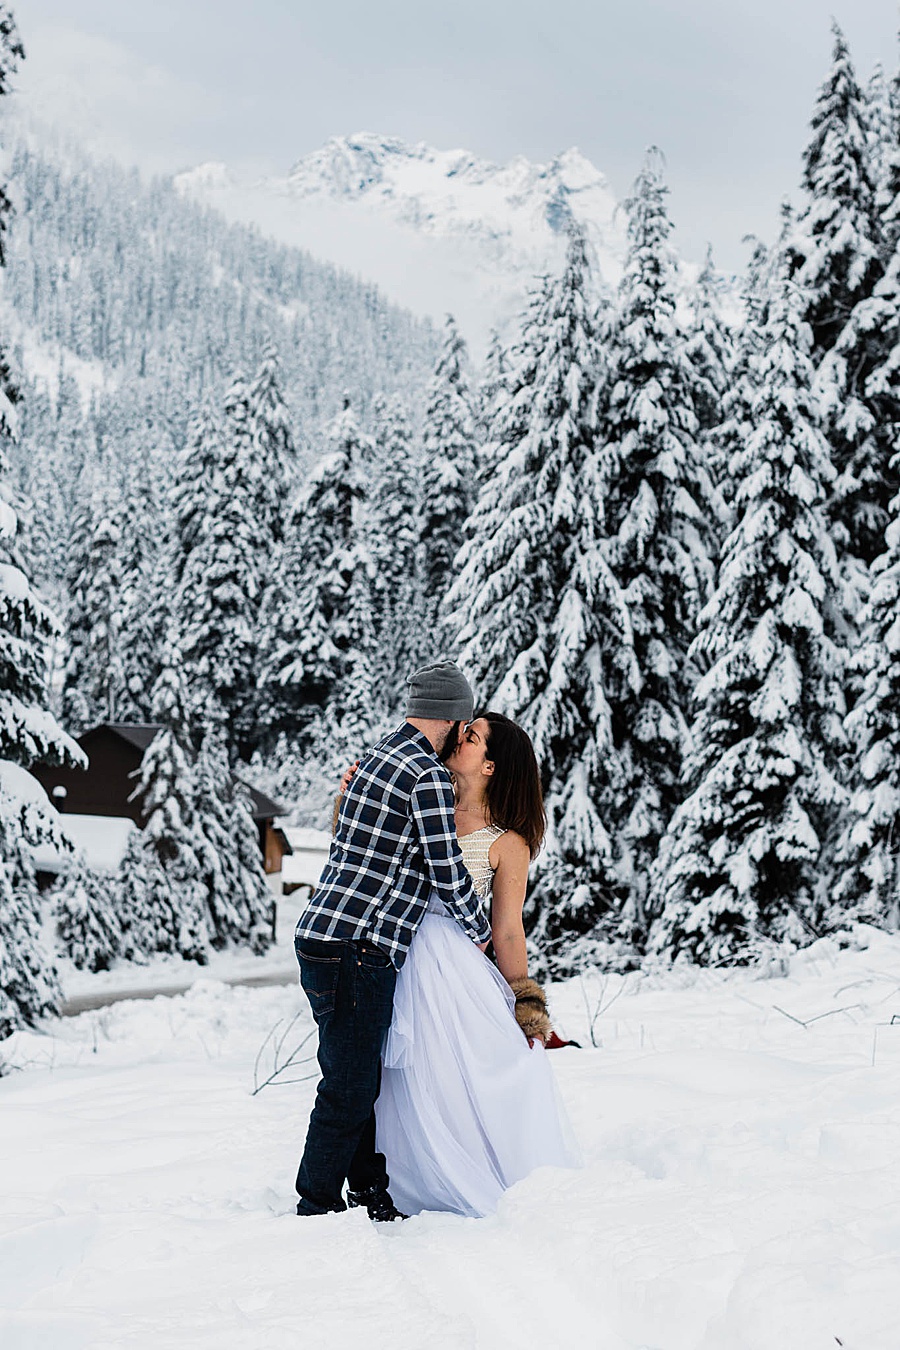 A couple kisses among a snowy winter scene at Snoqualmie Pass in Washington